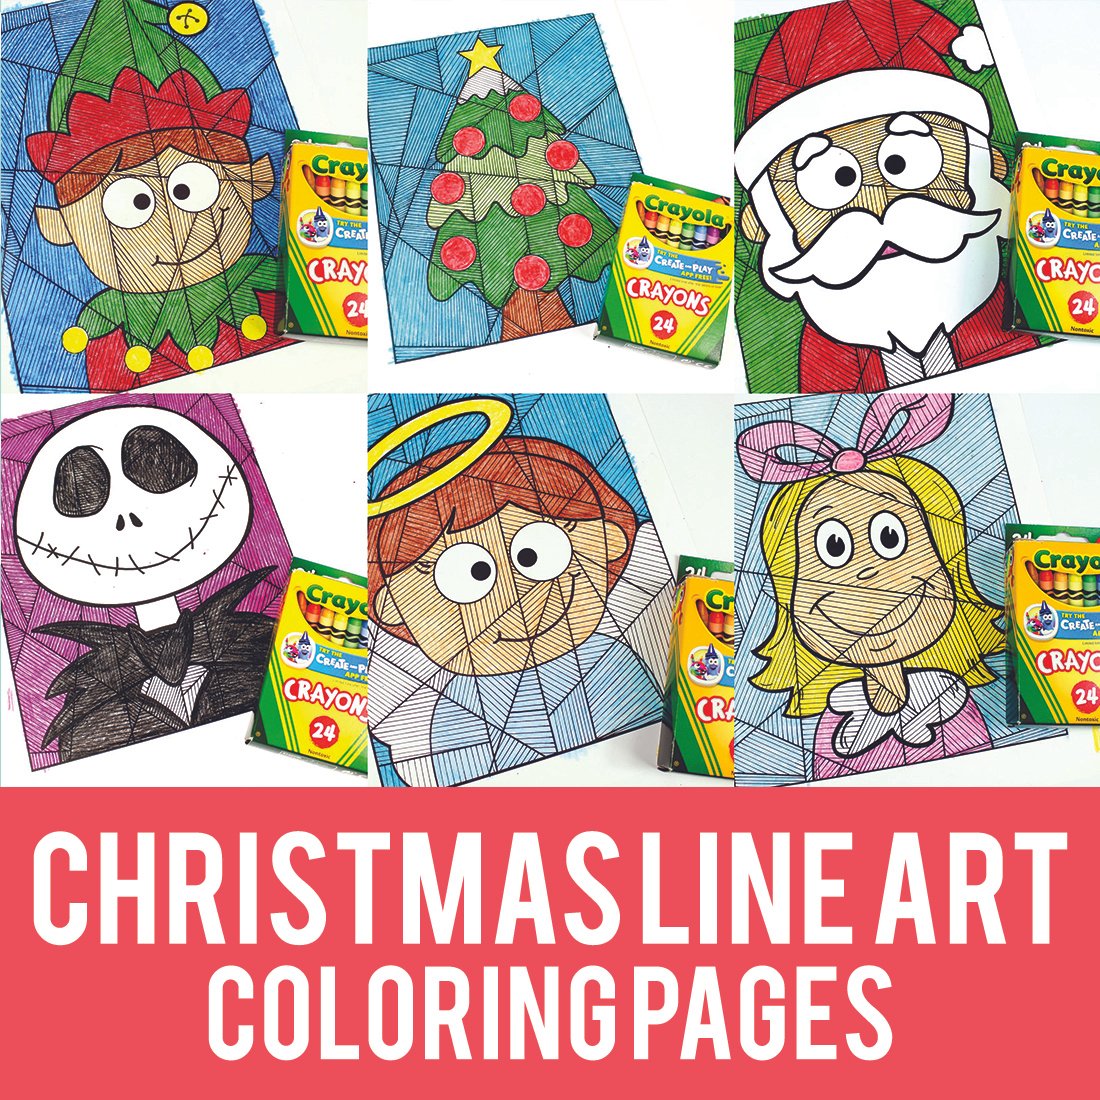 Christmas colouring pages line art for kids